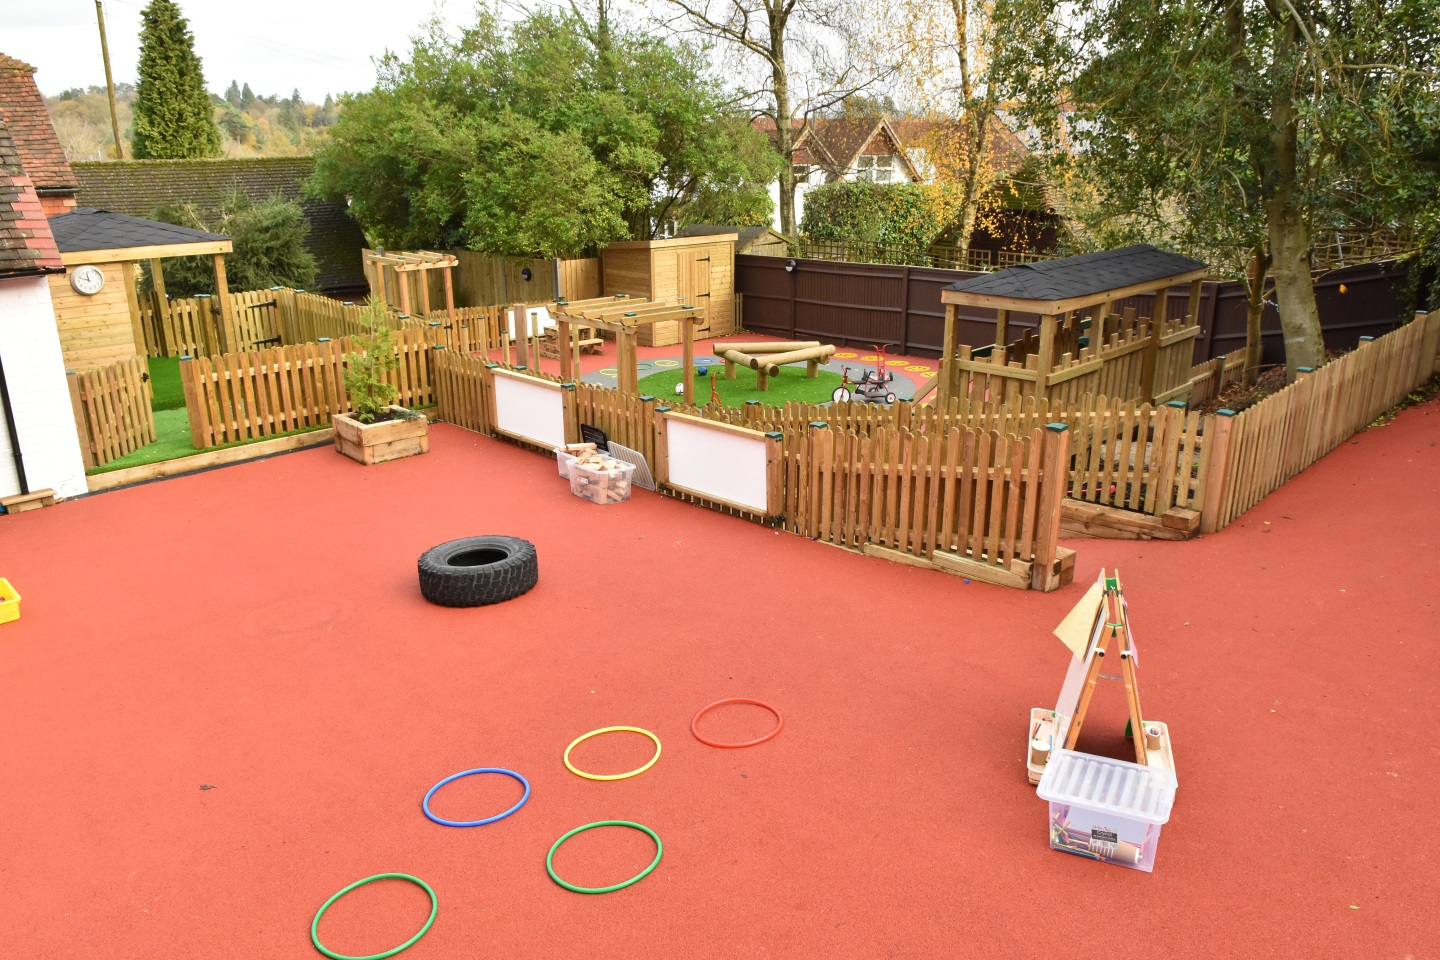 Bright Horizons Haslemere Day Nursery and Preschool Surrey 03300 573582